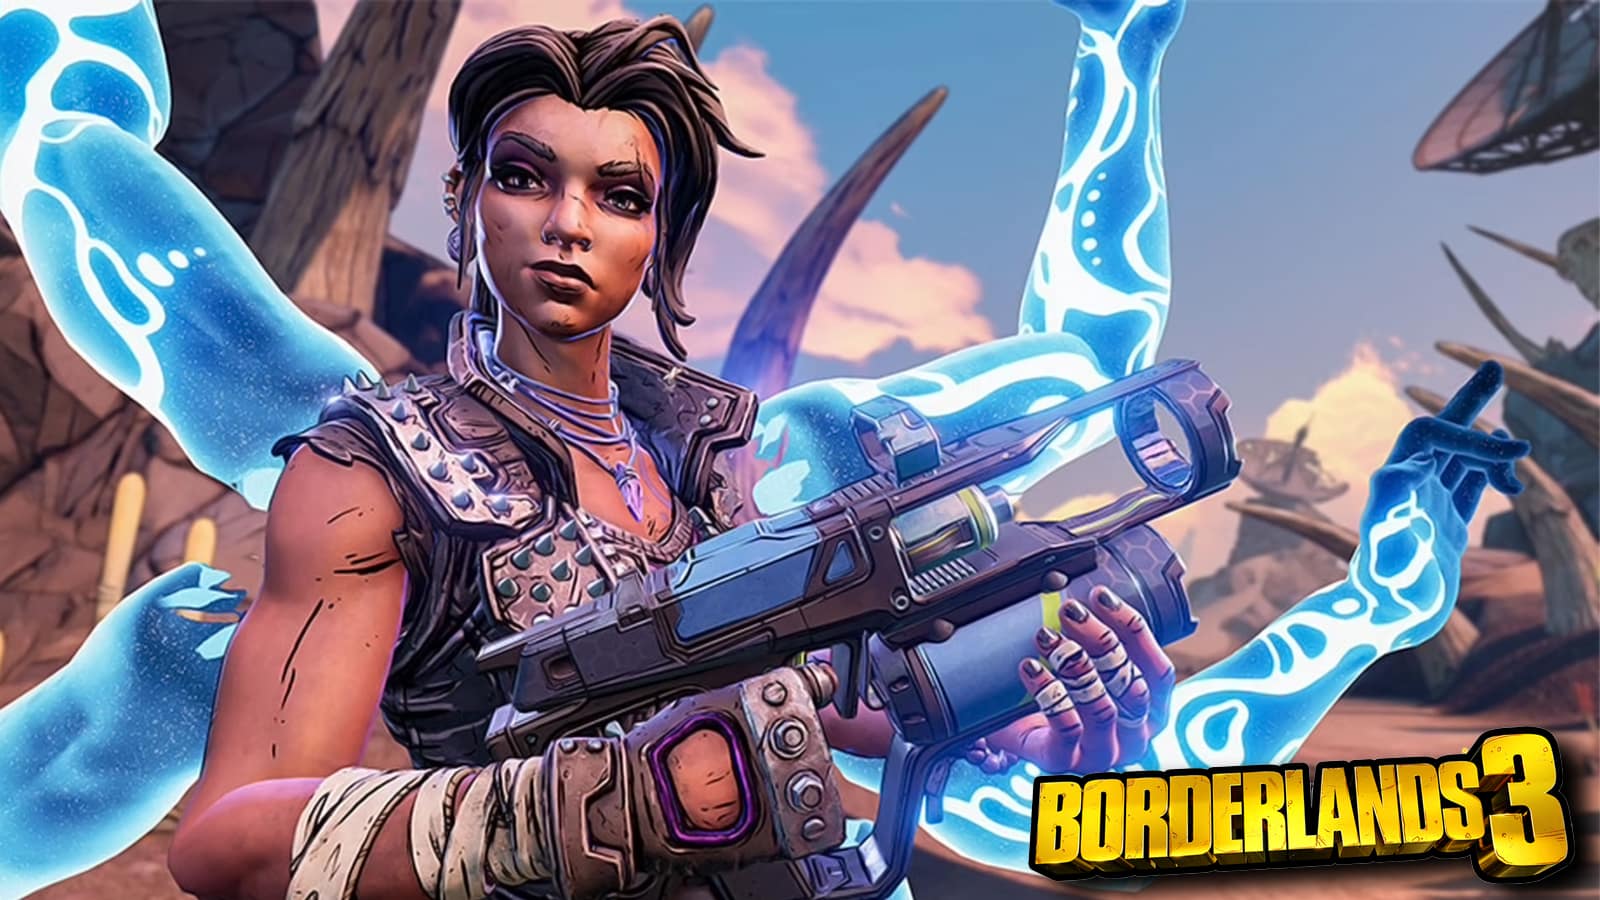 All available shift codes in Borderlands 3